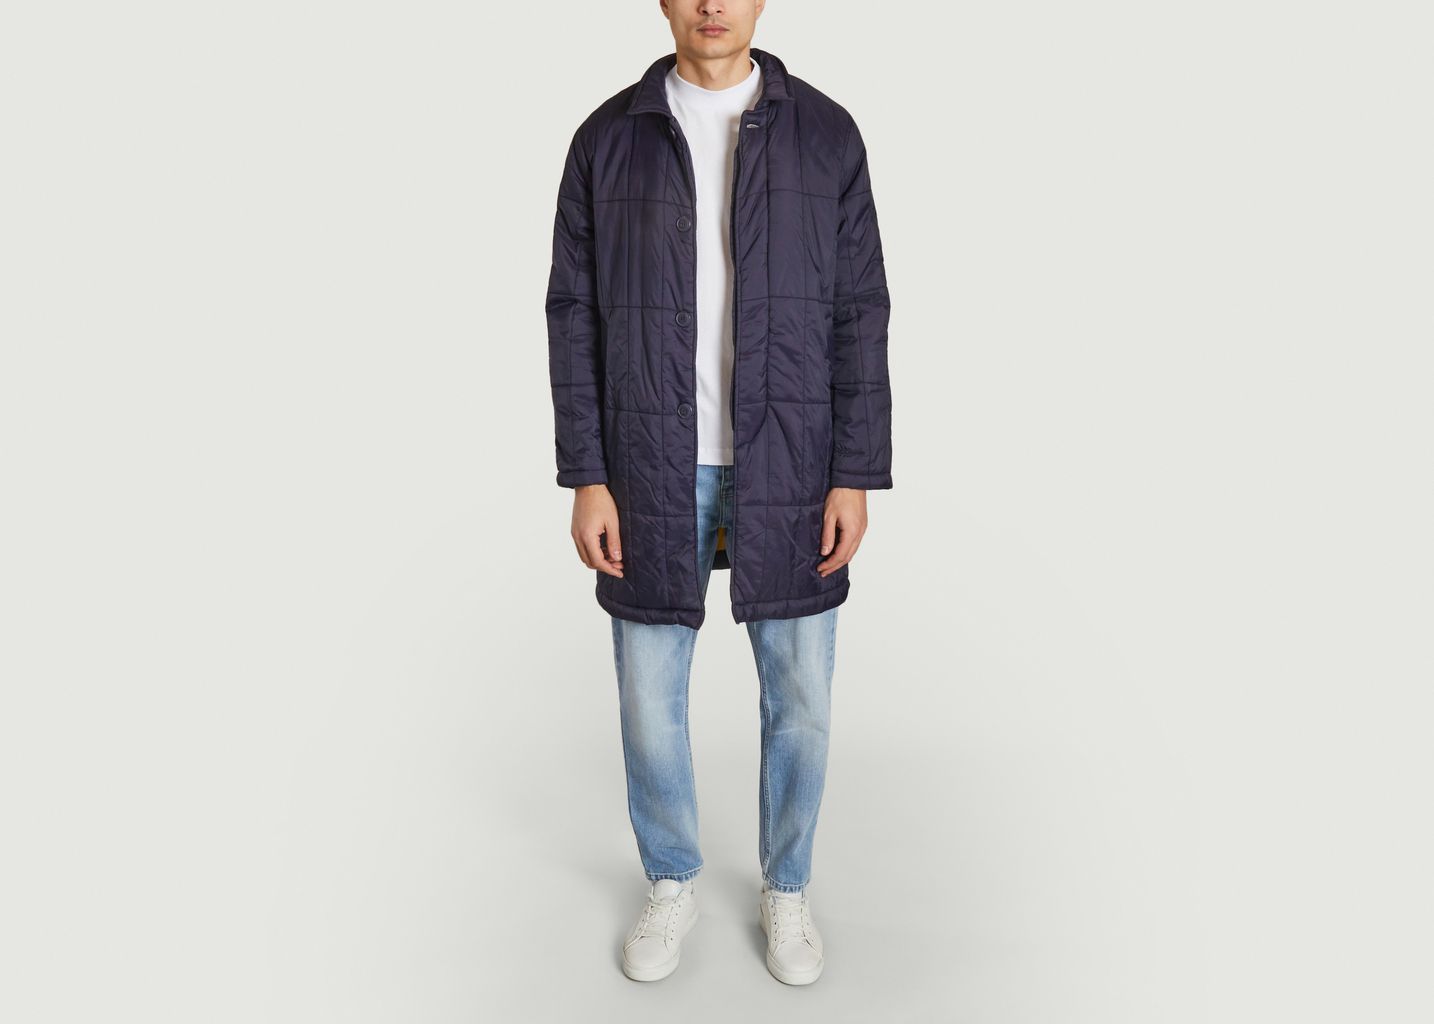 Manteau Padded Single Breasted Mac - M.C. Overalls